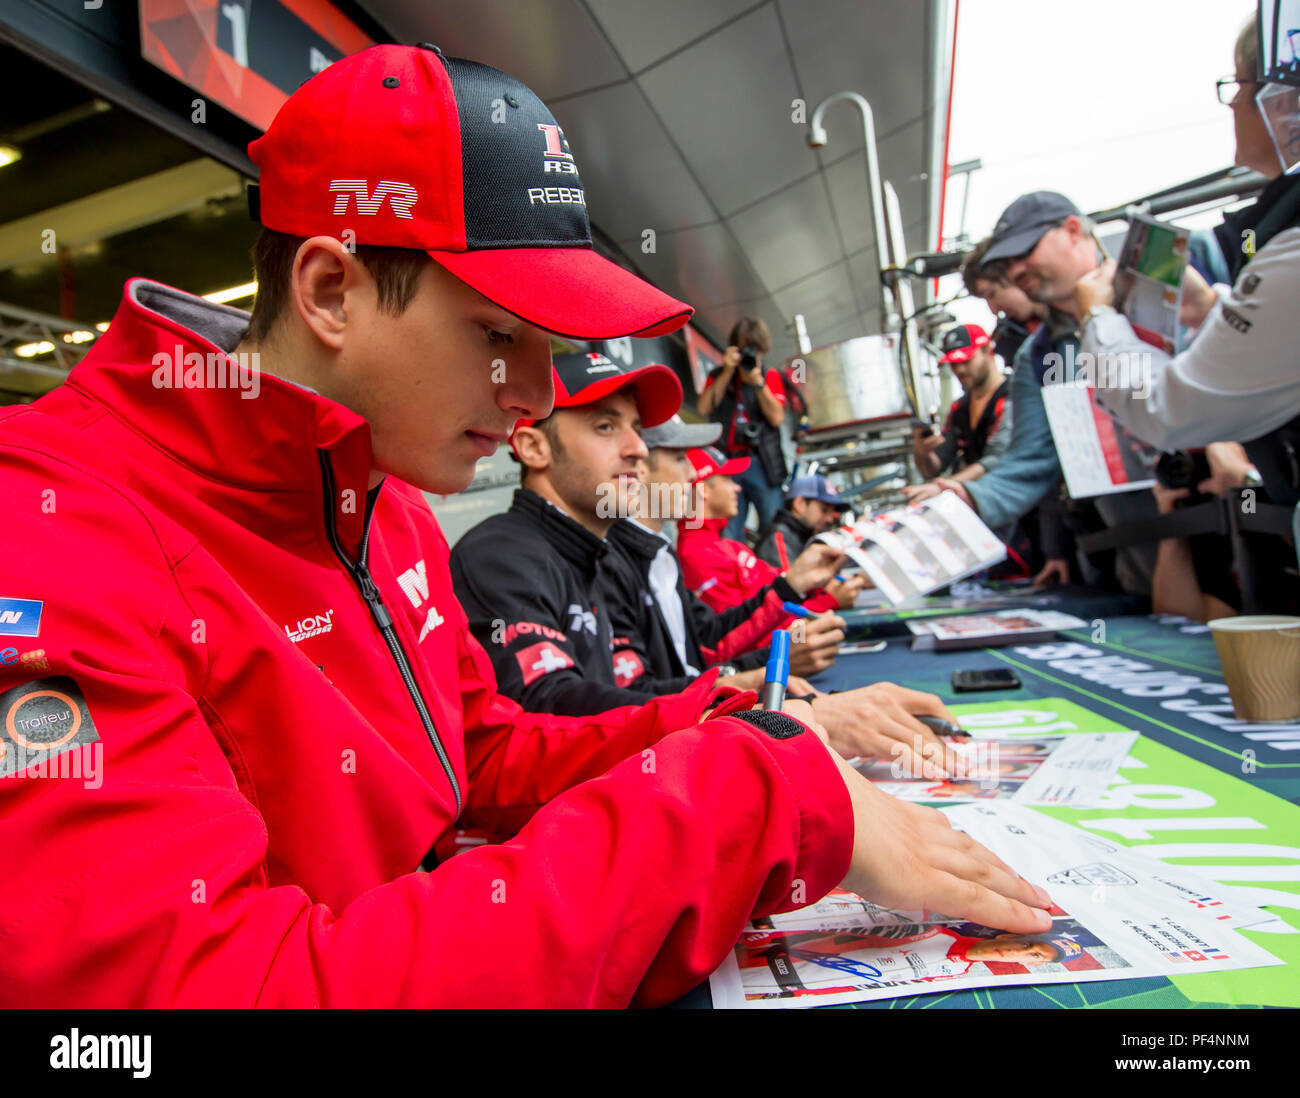 Silverstone Circuit, UK. 19th Aug, 2018. FIA World Endurance Championship; Thomas Laurent (FRA) of the Rebellion R13 Gibson LMP1 racing car from Rebellion Racing (CHE) signing autographs outside the pit garage at Round 3 of the FIA World Endurance Championship at Silverstone Credit: Action Plus Sports/Alamy Live News Stock Photo